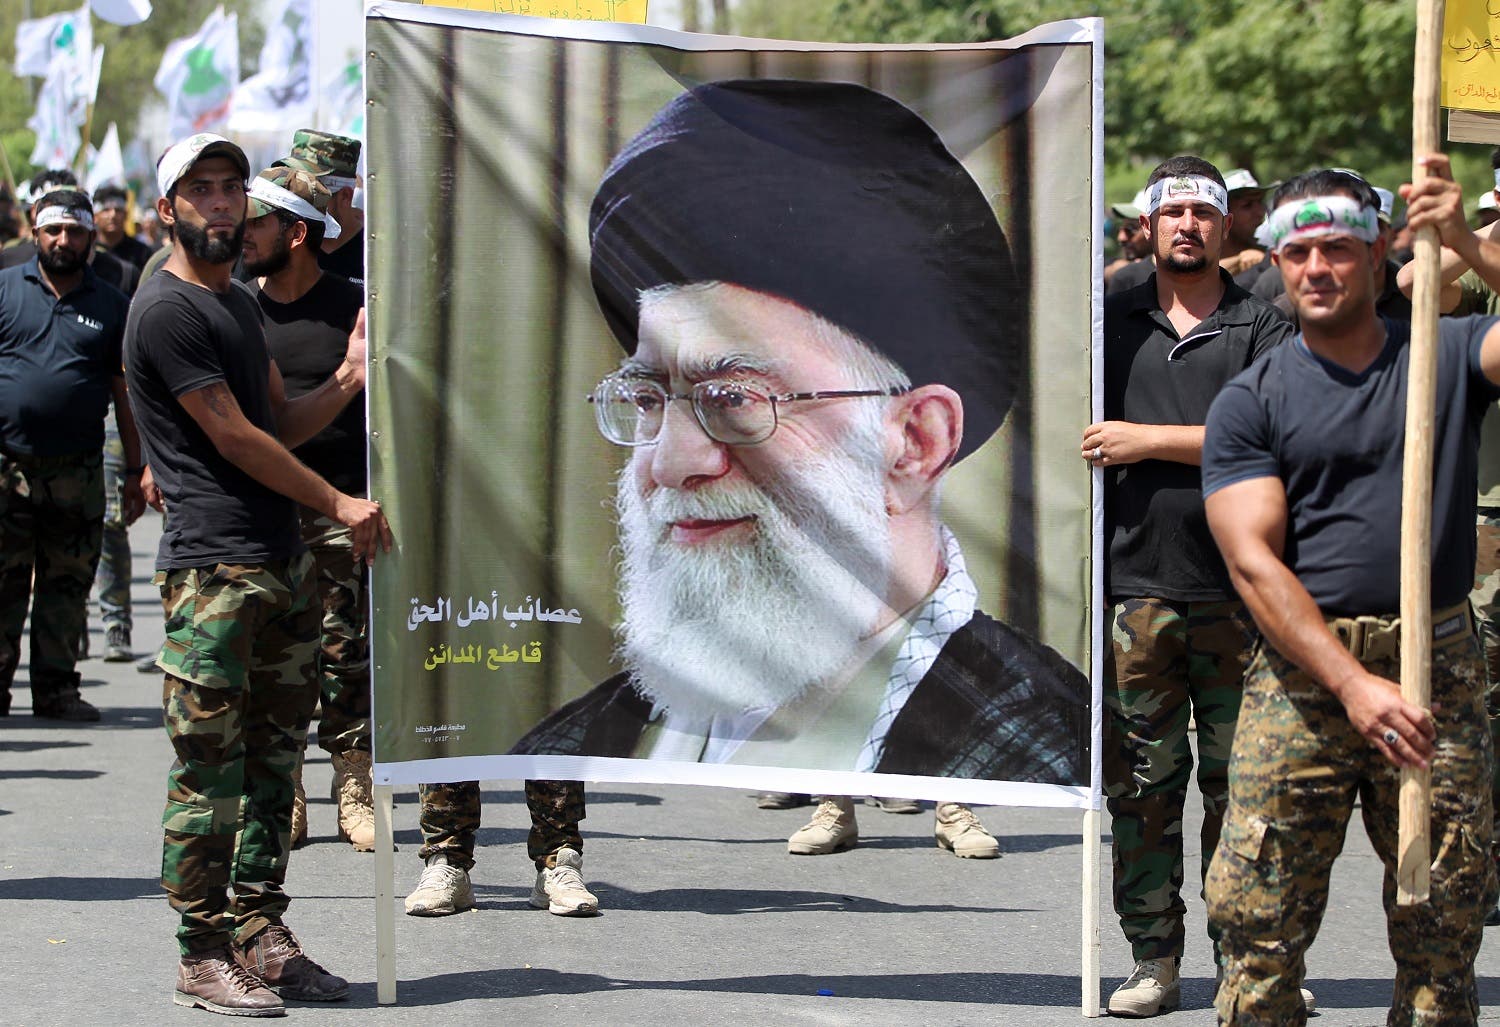 Iraqi pro-government forces hold a poster bearing a portrait of Ayatollah Ali Khamenei as they take part in a parade marking al-Quds (Jerusalem) Day in Baghdad, on July 1, 2016. (AFP)